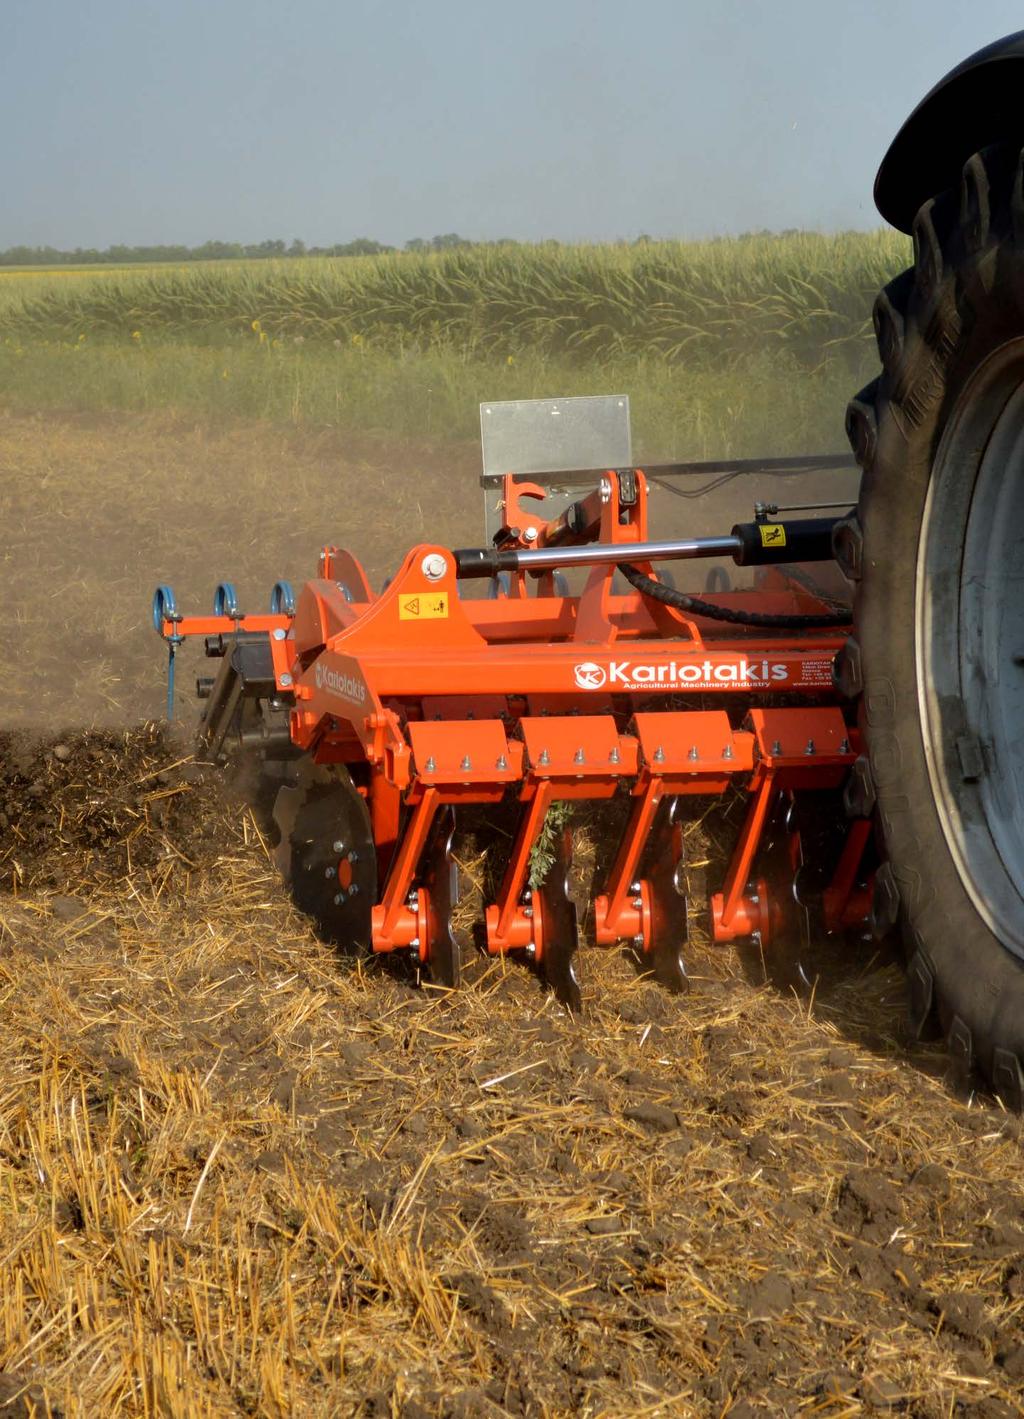 Indepentet discs The SmartDisc may yield the greatest soil cultivation as each disc can work independently.